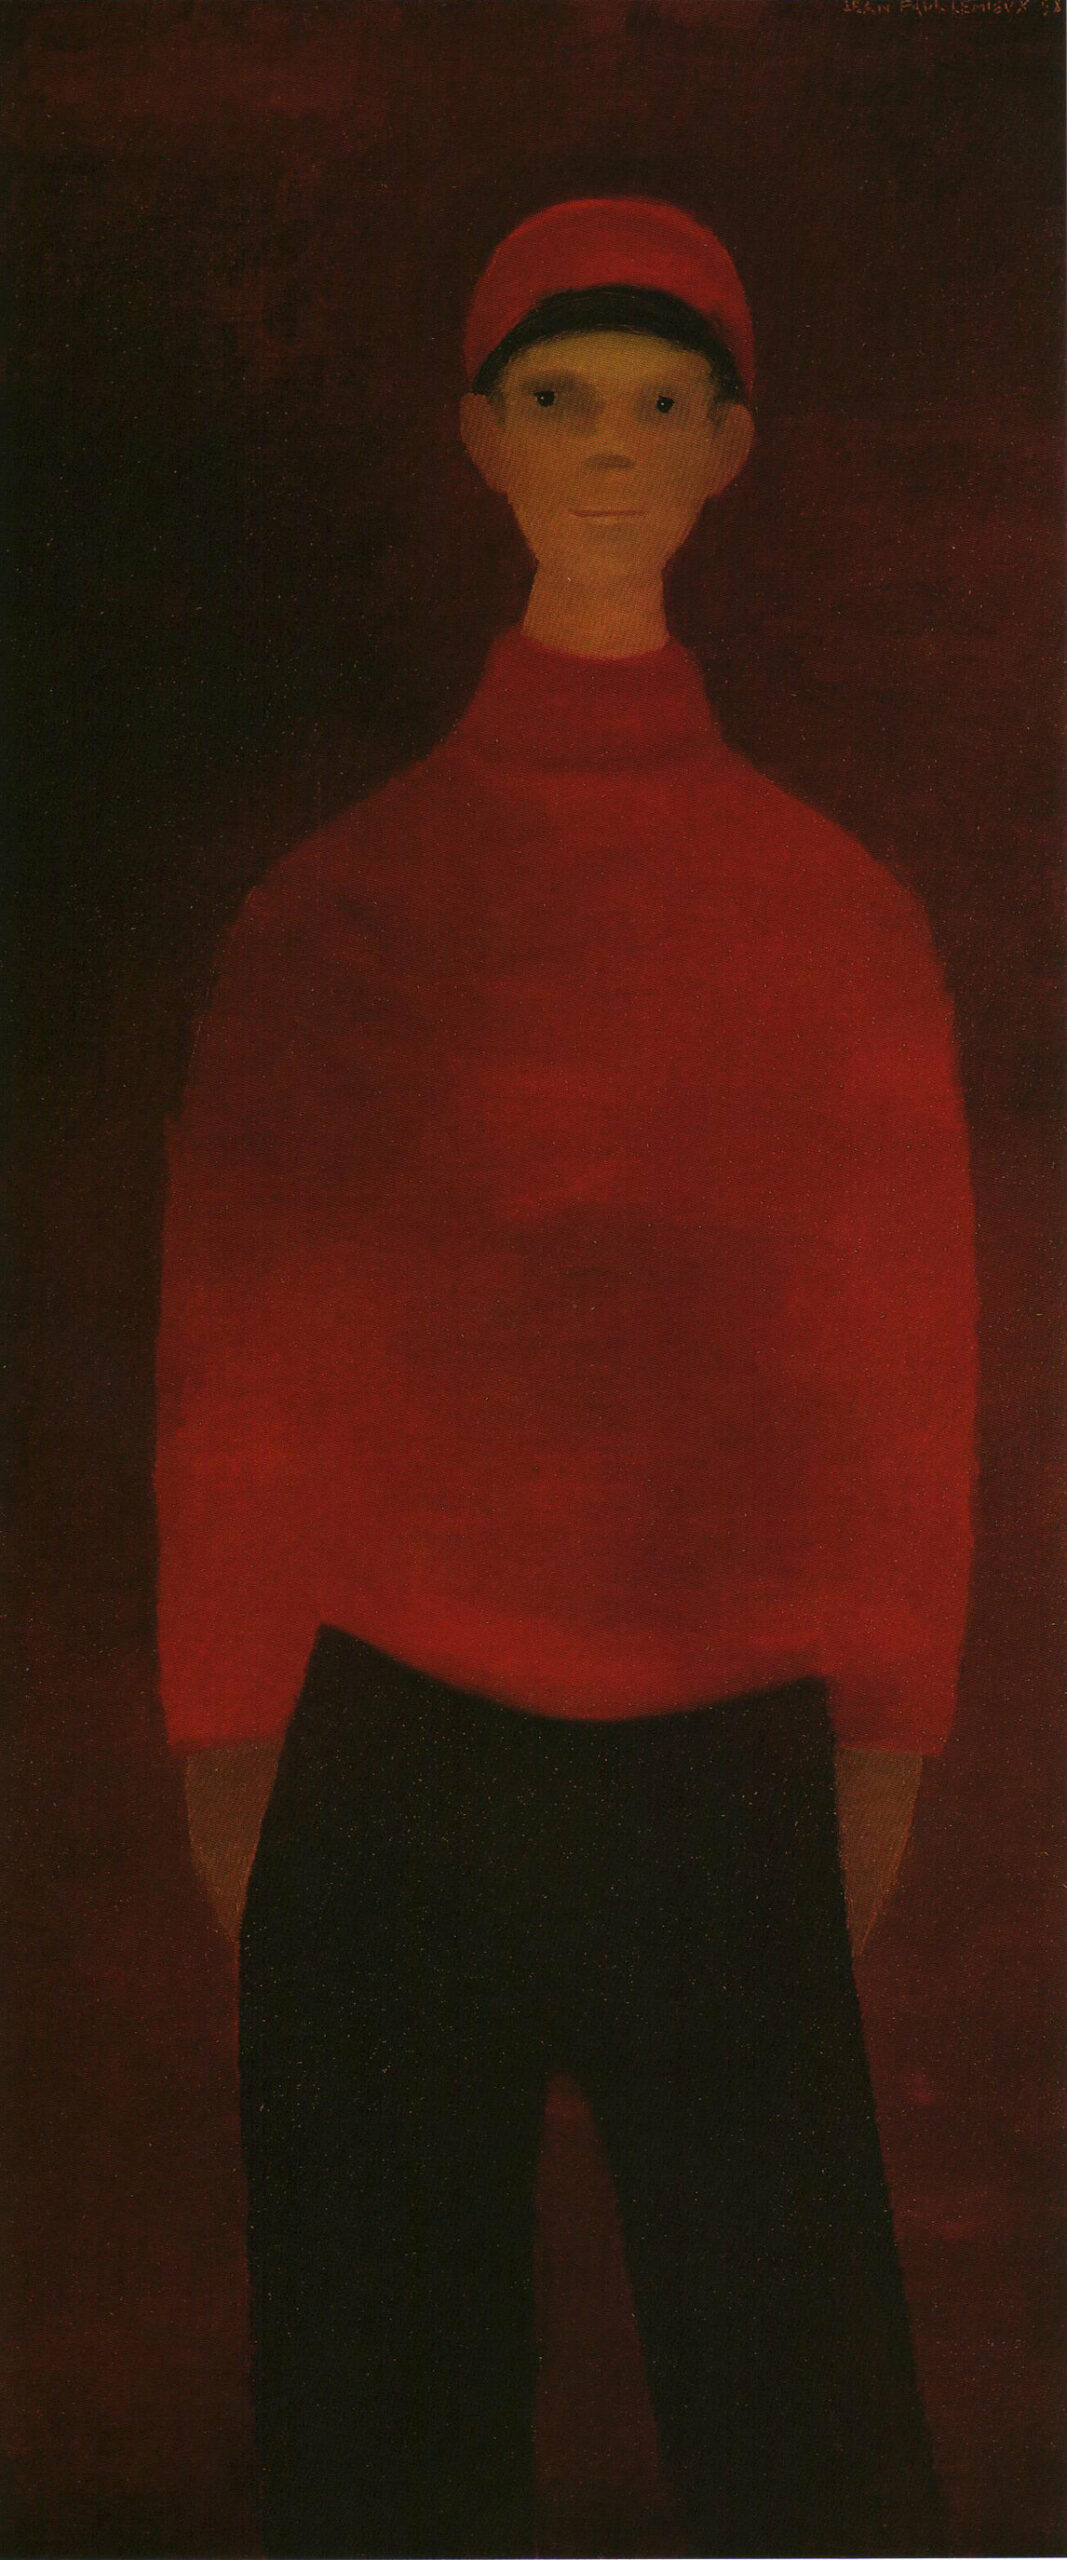 Art Canada Institute, Jean Paul Lemieux, The Red Sweater (Le chandail rouge), 1958